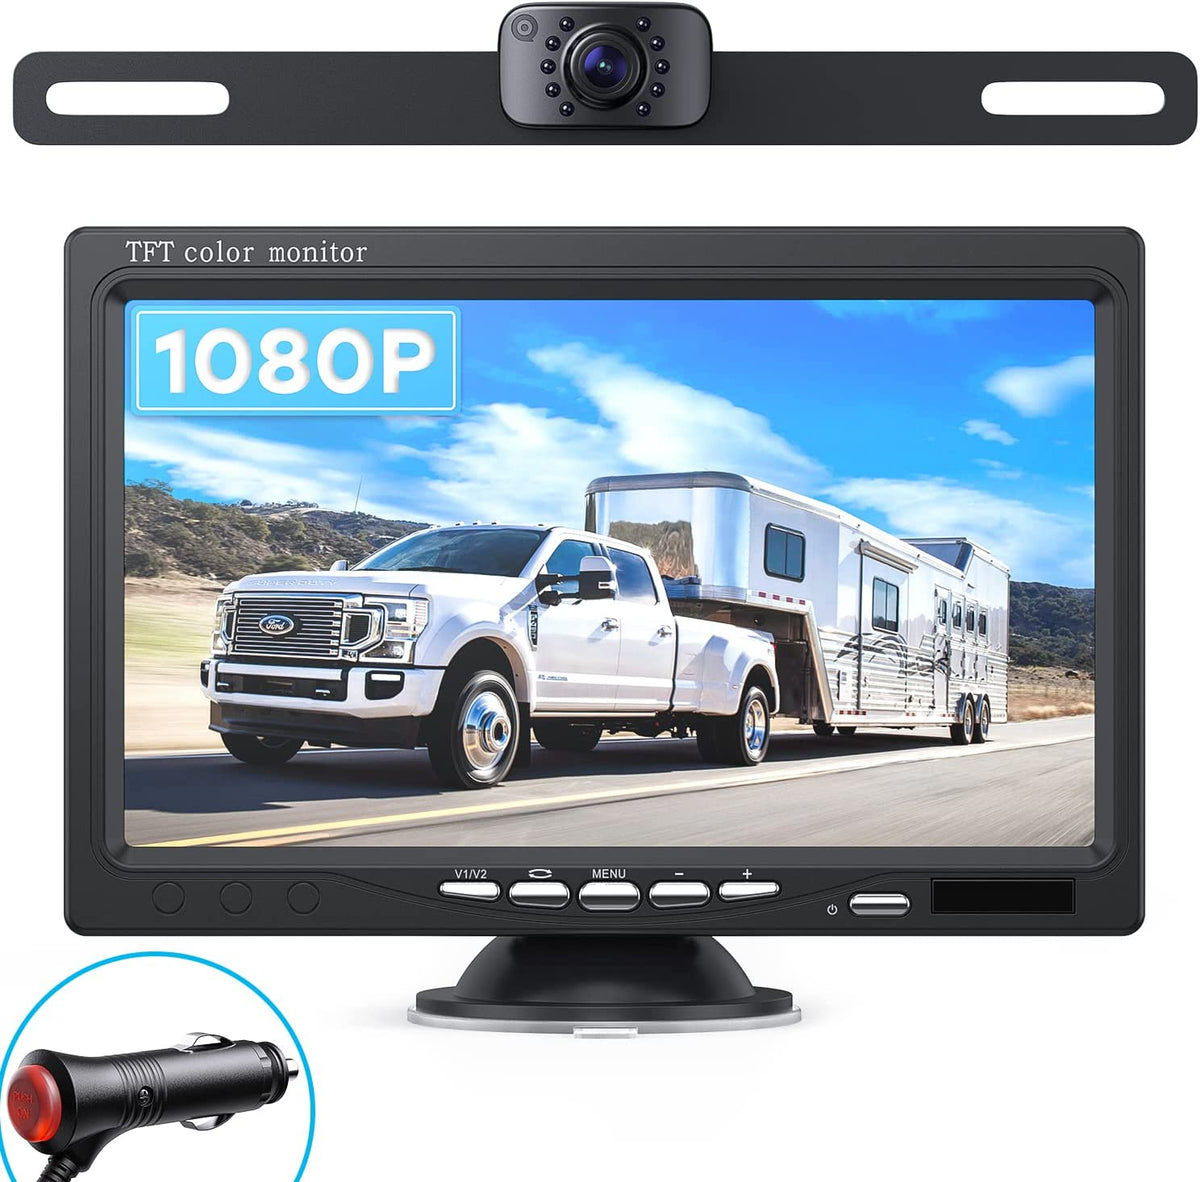 Upgrade Solar Wireless Backup Camera for Truck, 3Mins No Wires